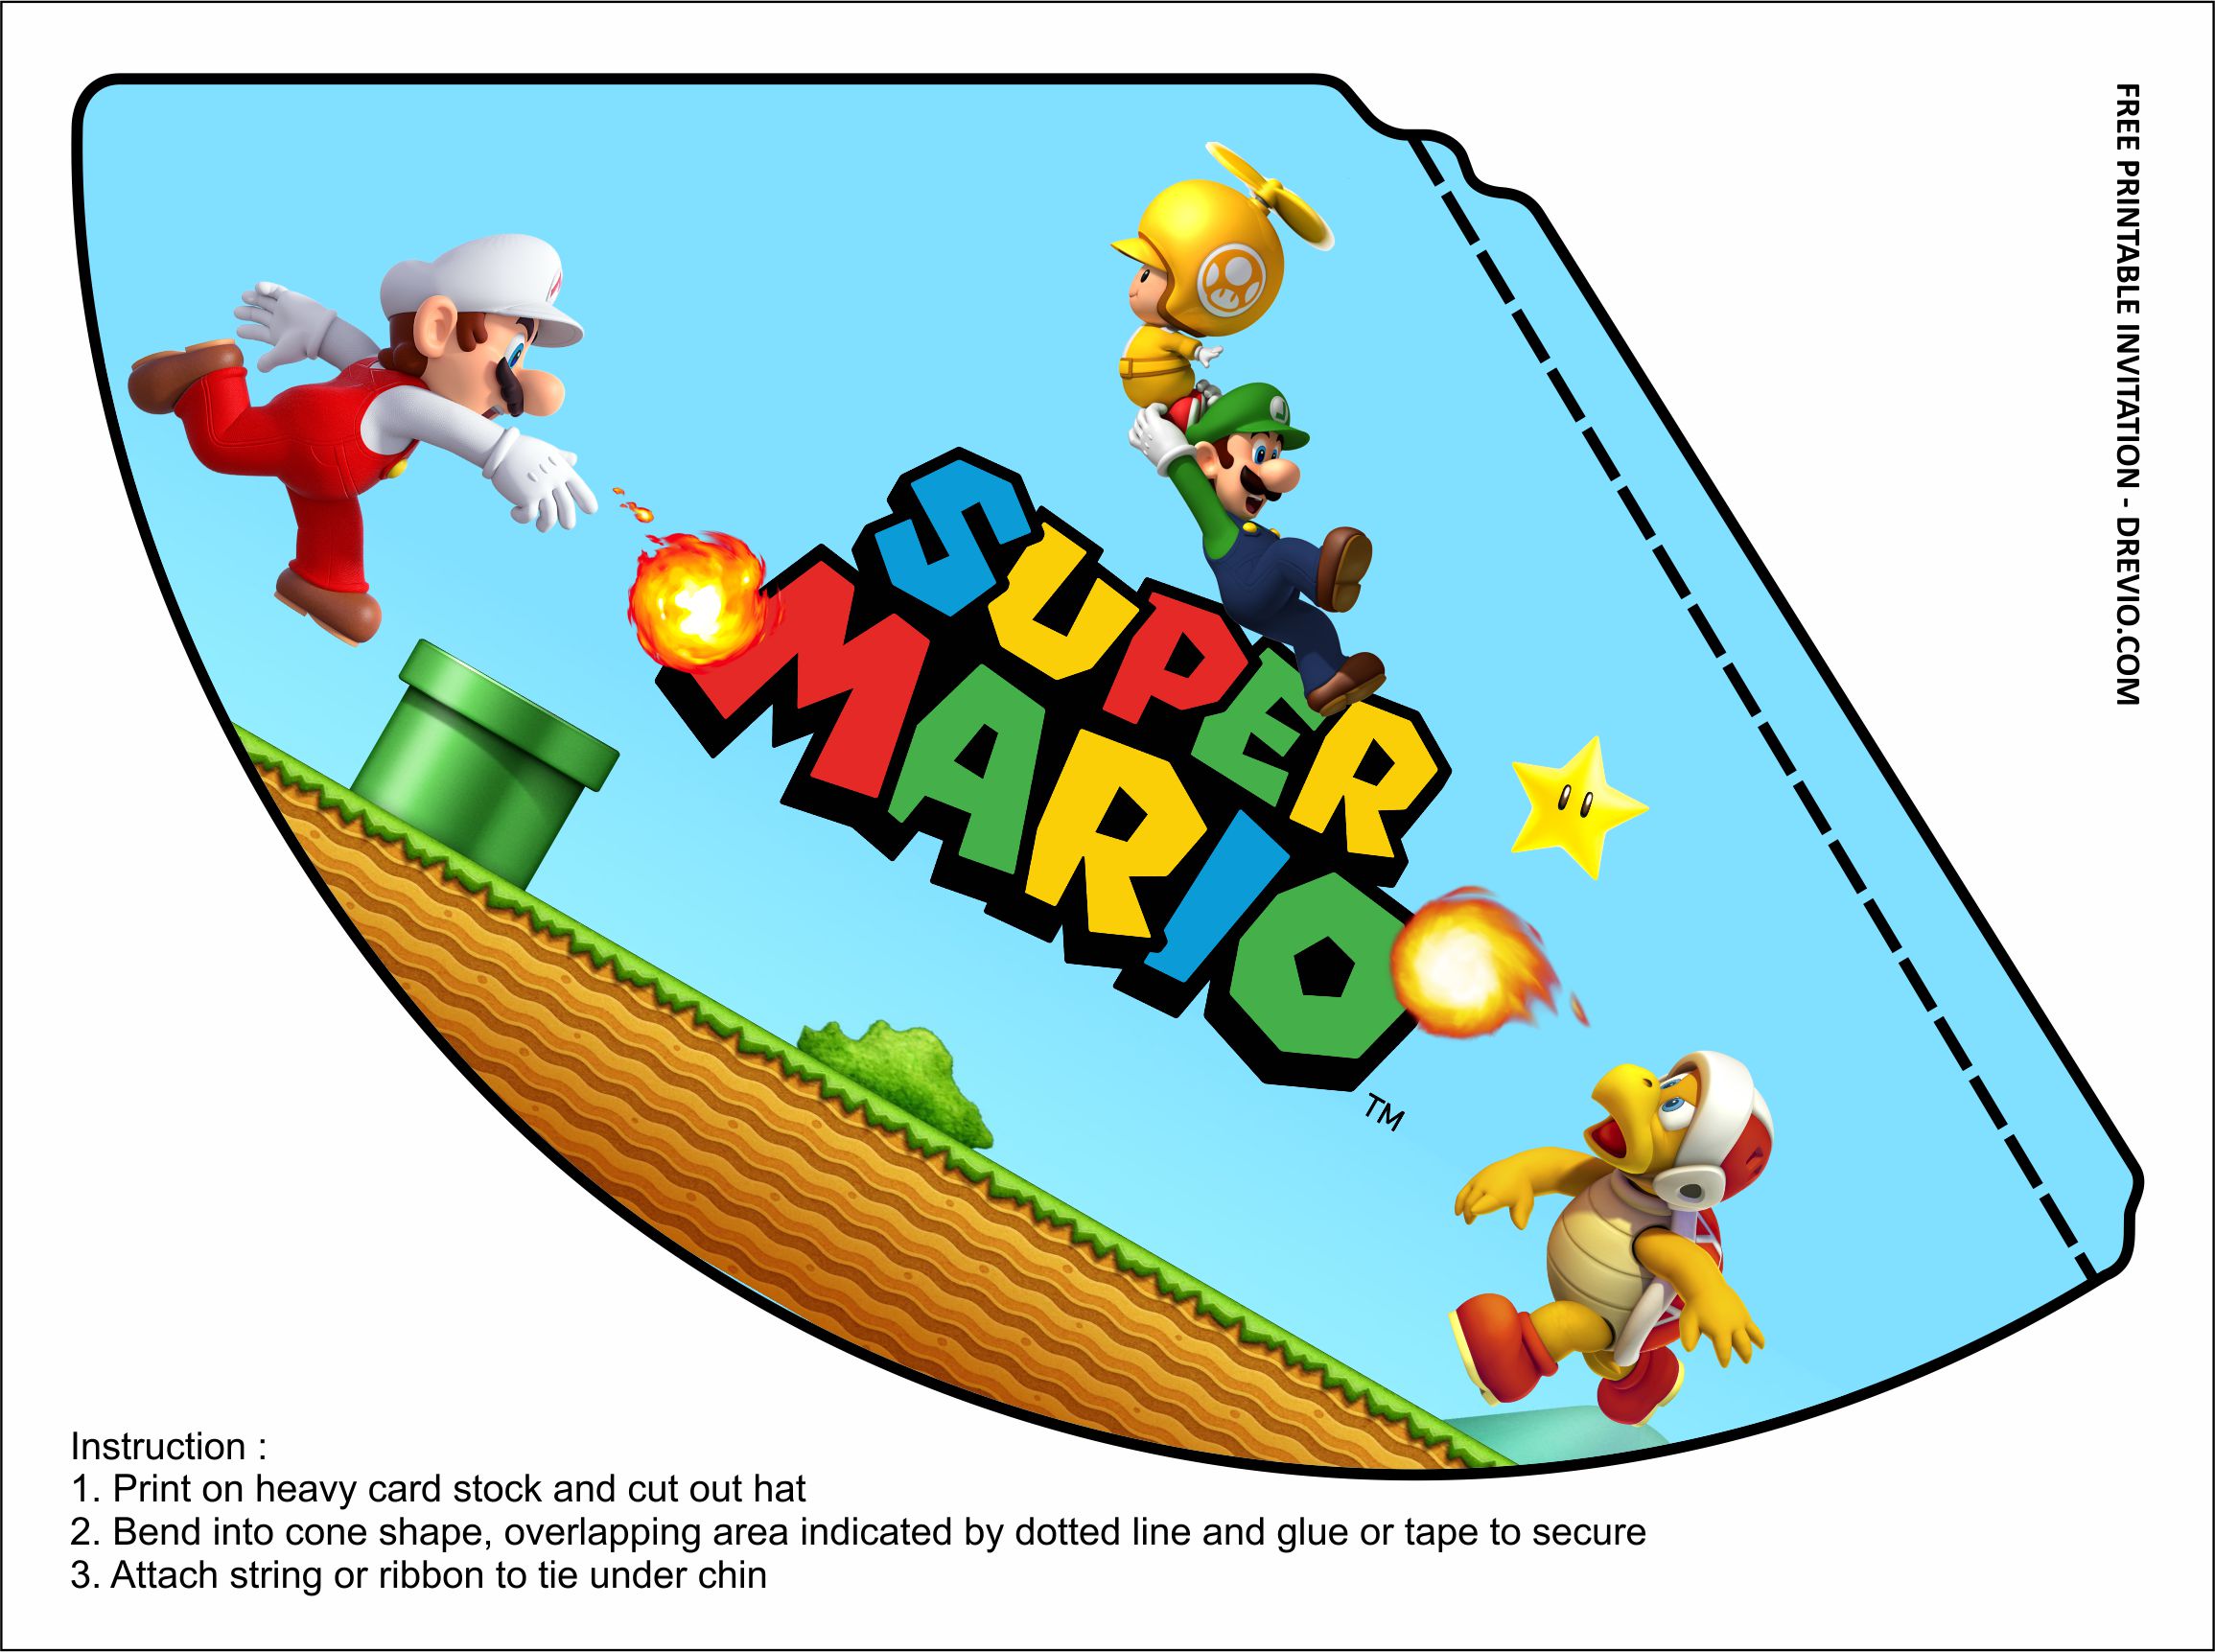 Super Mario Bros: Free Printable Poster. - Oh My Fiesta! for Geeks